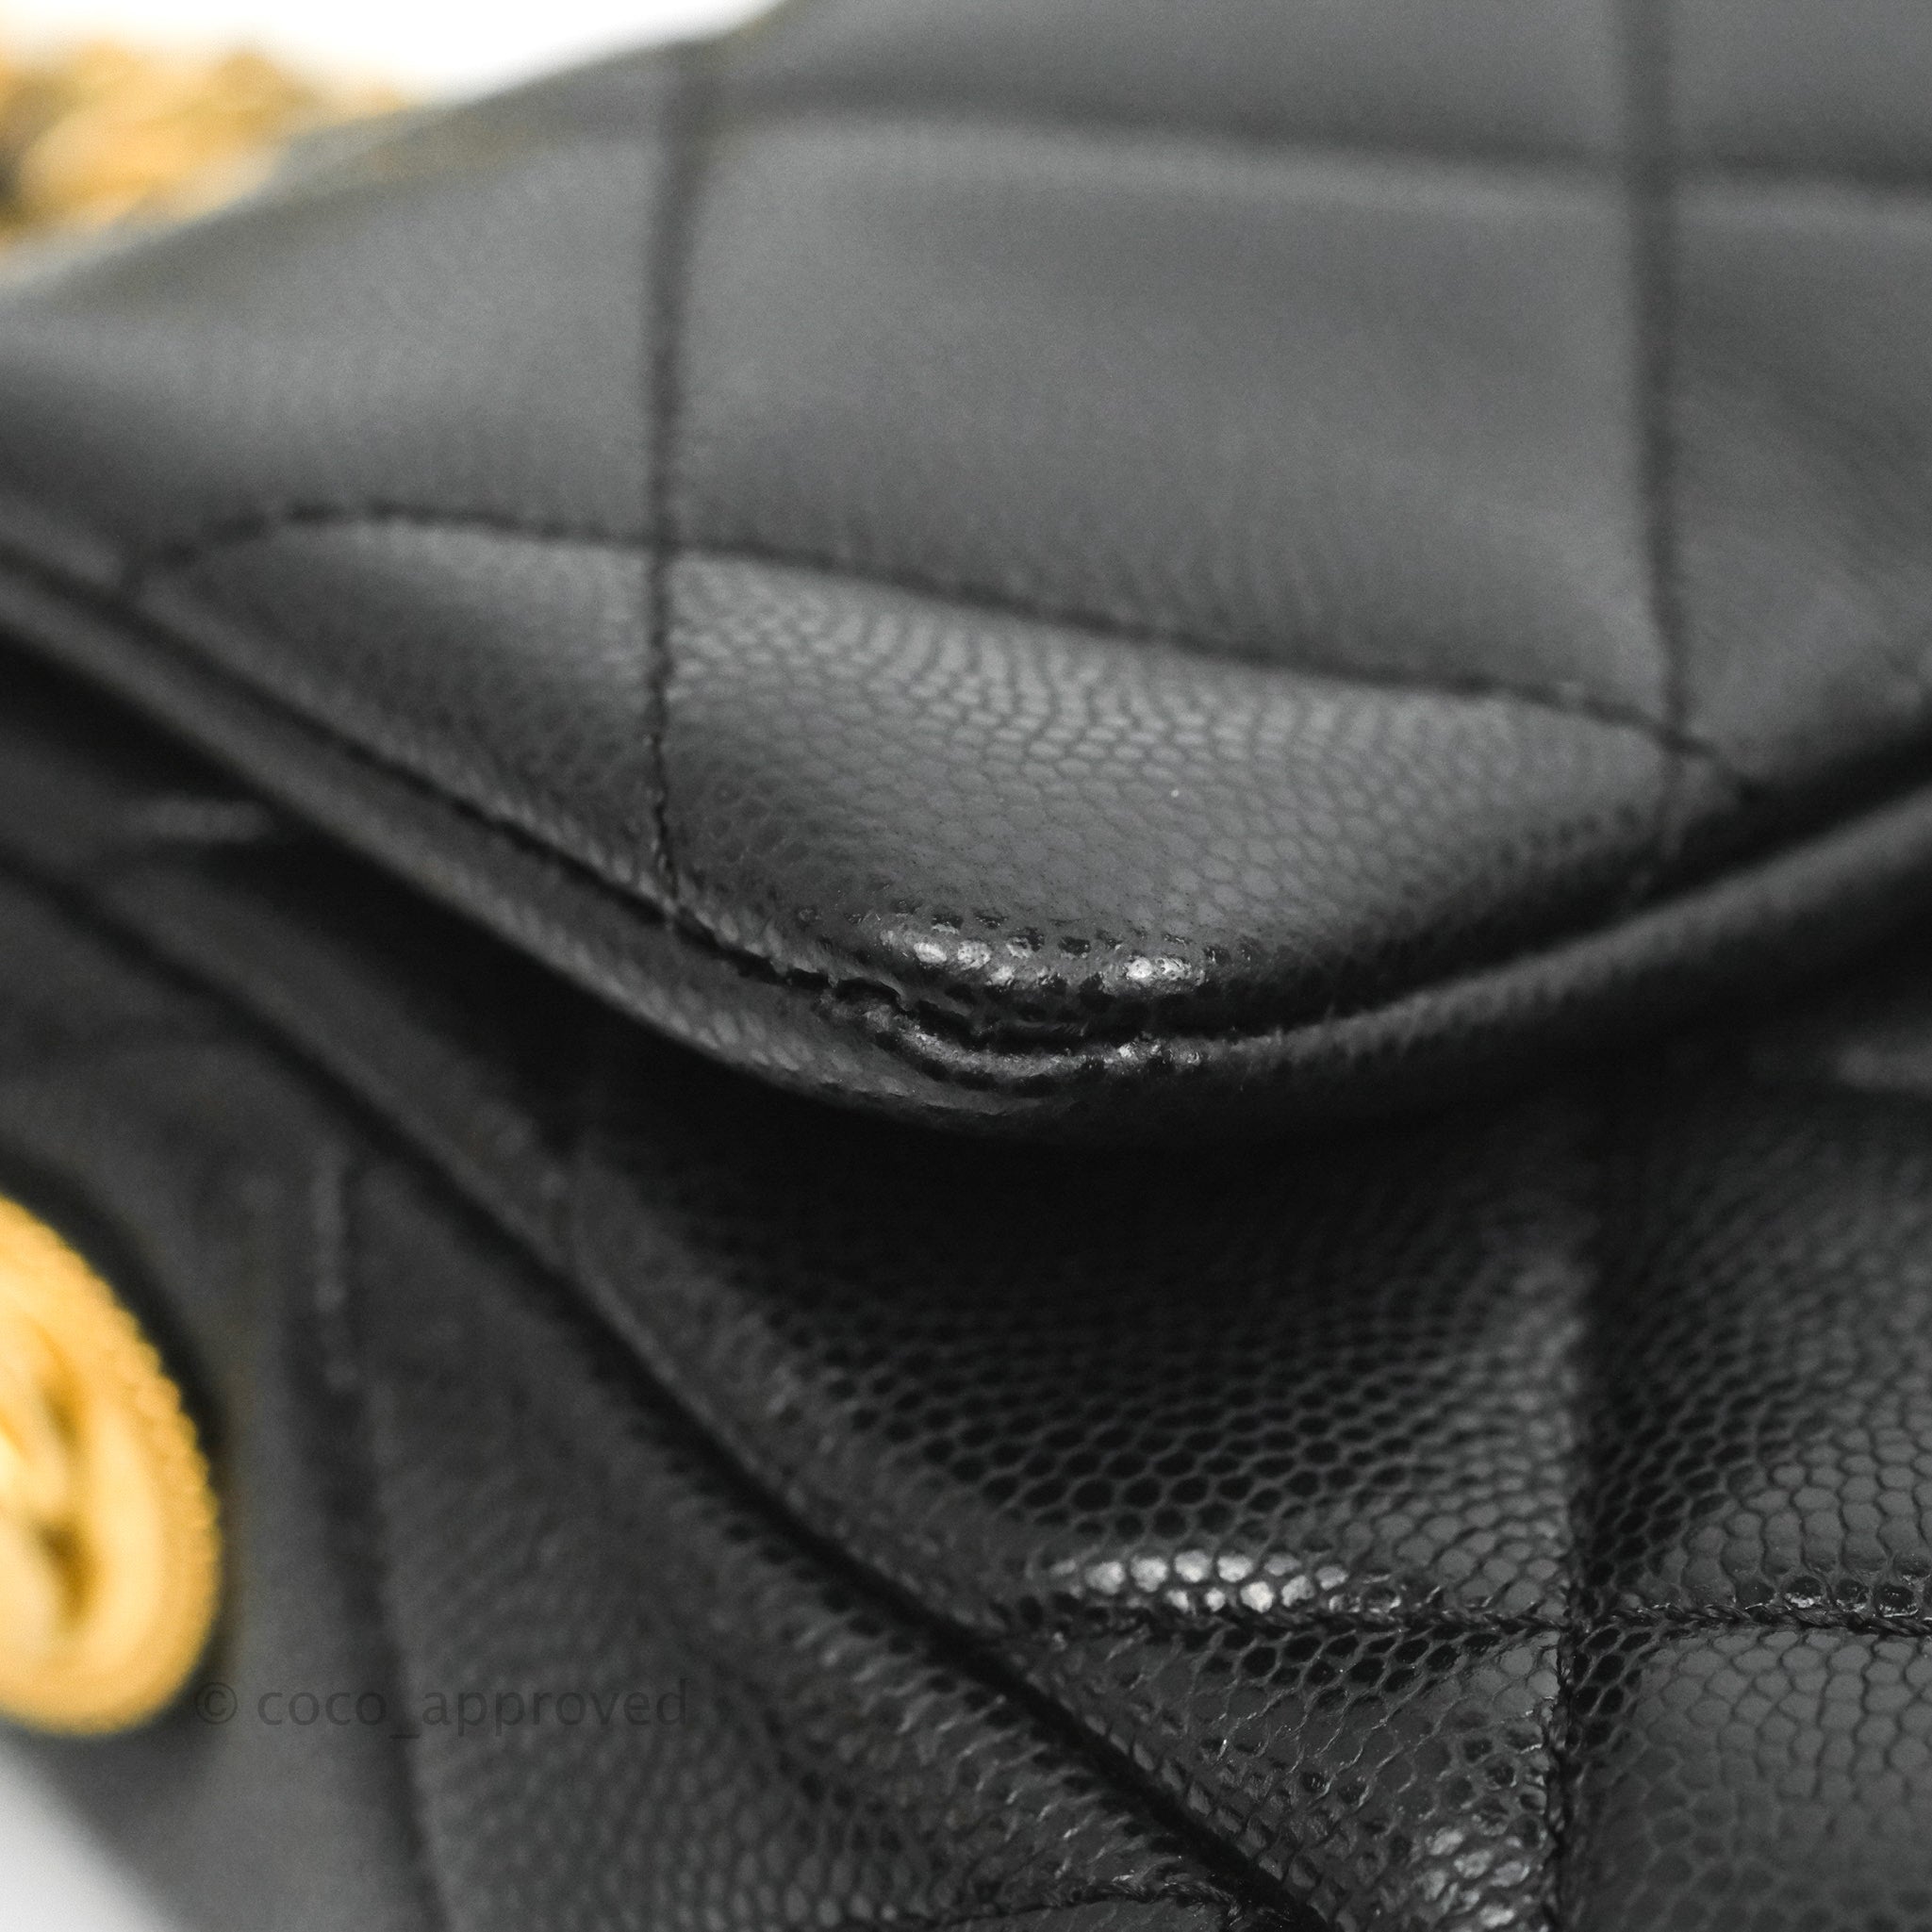 Shop authentic new, pre-owned, vintage Chanel classic flaps, 2.55 reissues  - Timeless Luxuries